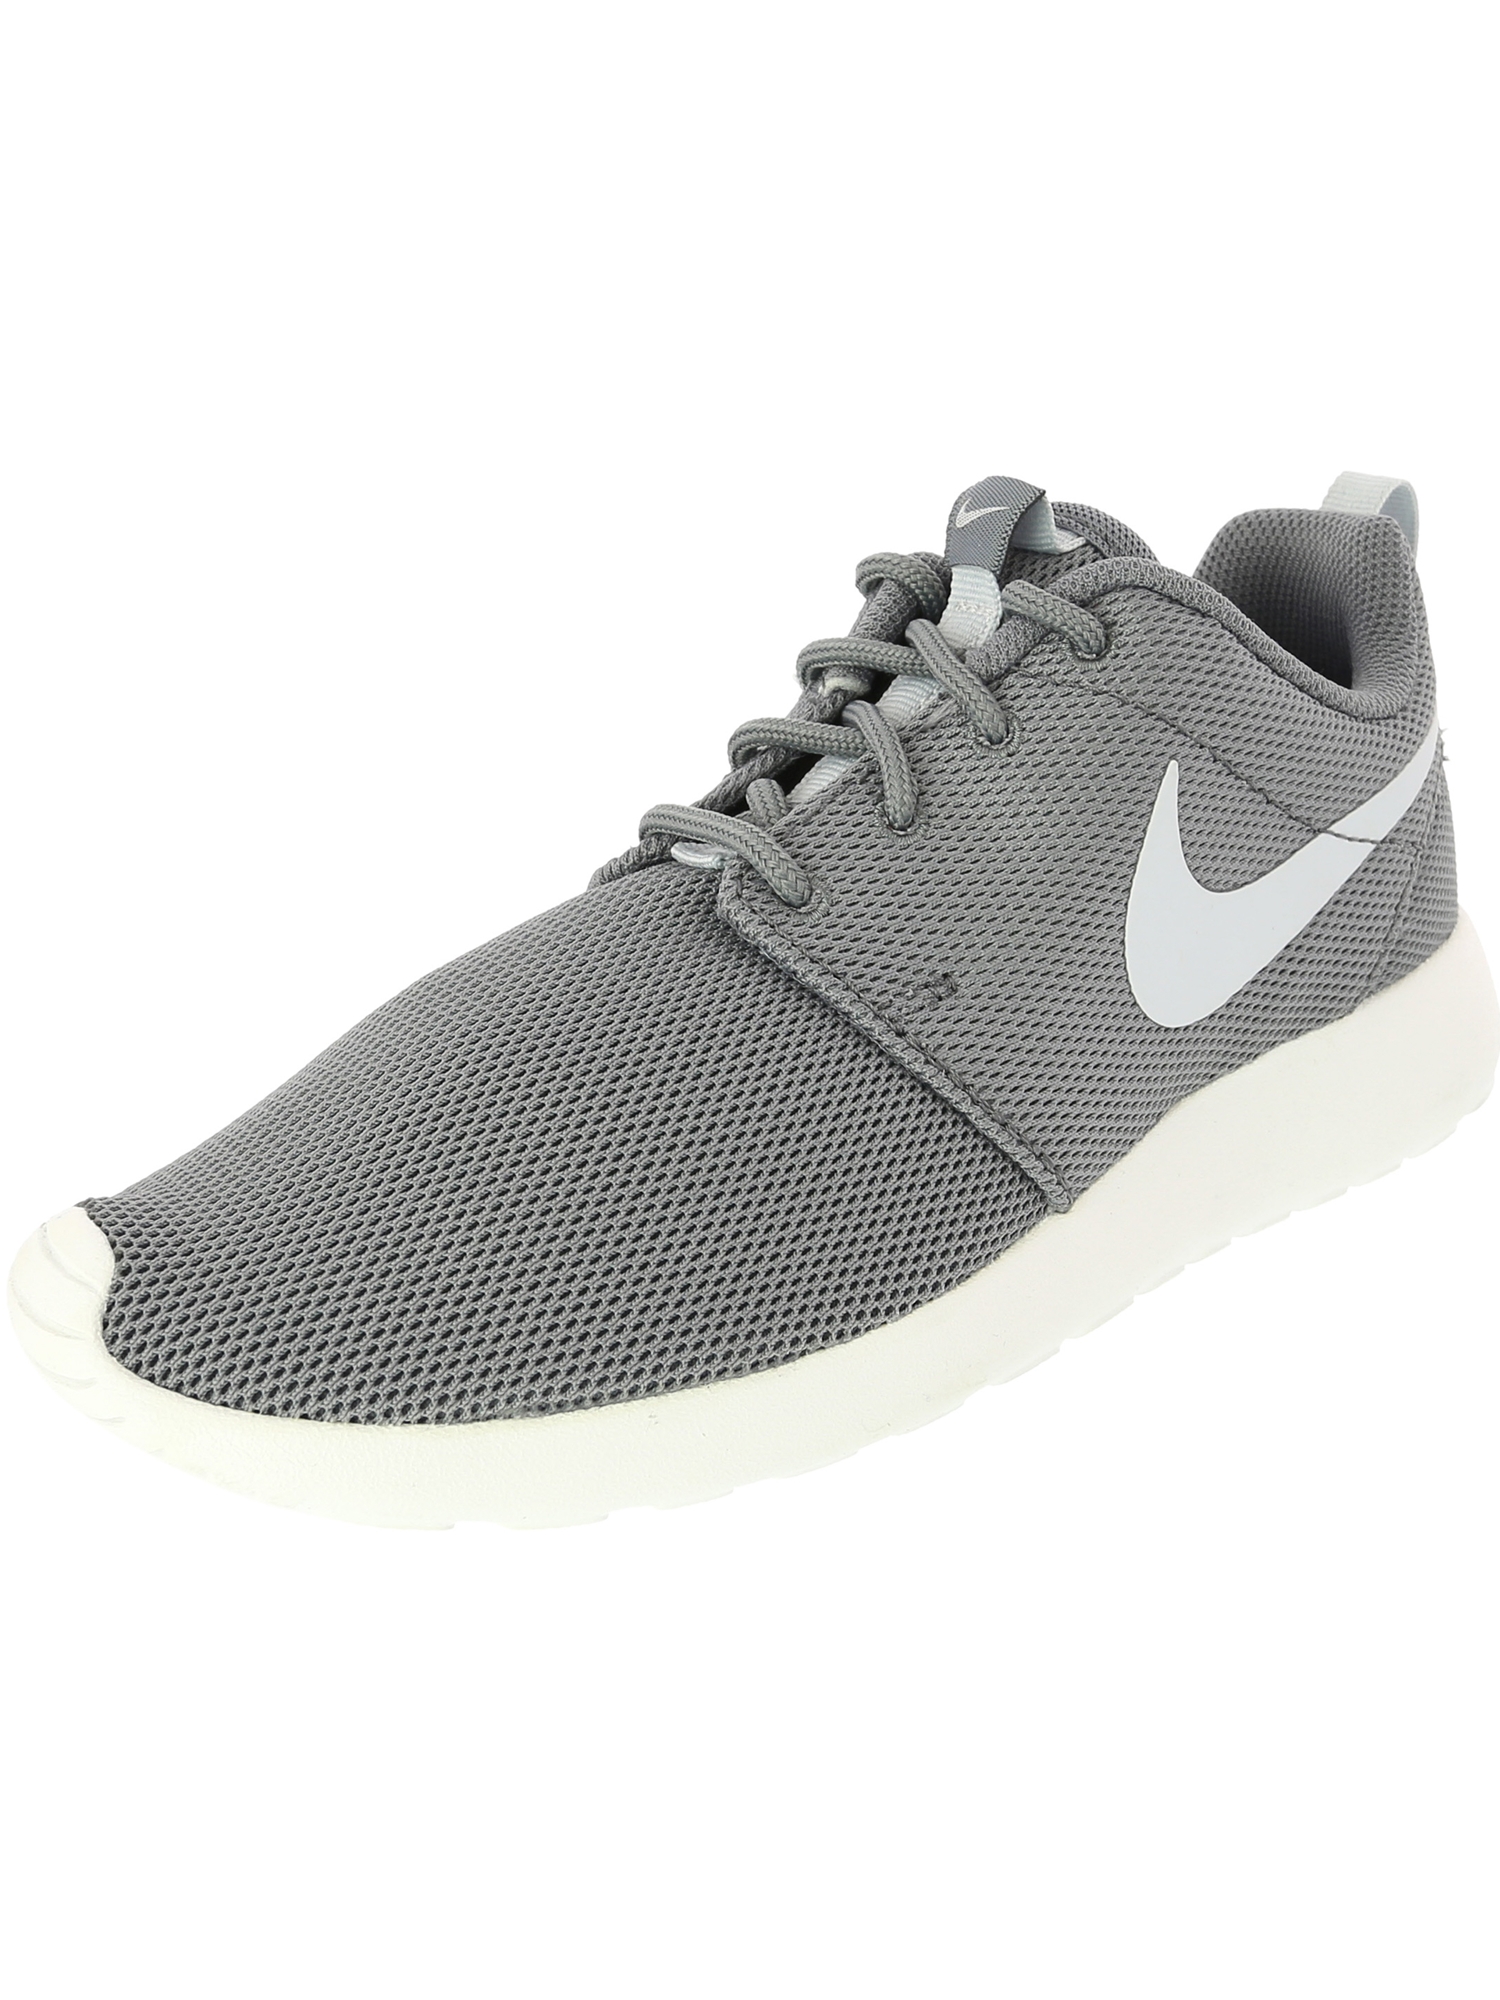 Nike Women's Roshe One Cool Grey/Pure Platinum Ankle-High Cotton Fashion Sneaker - 6M - image 1 of 3